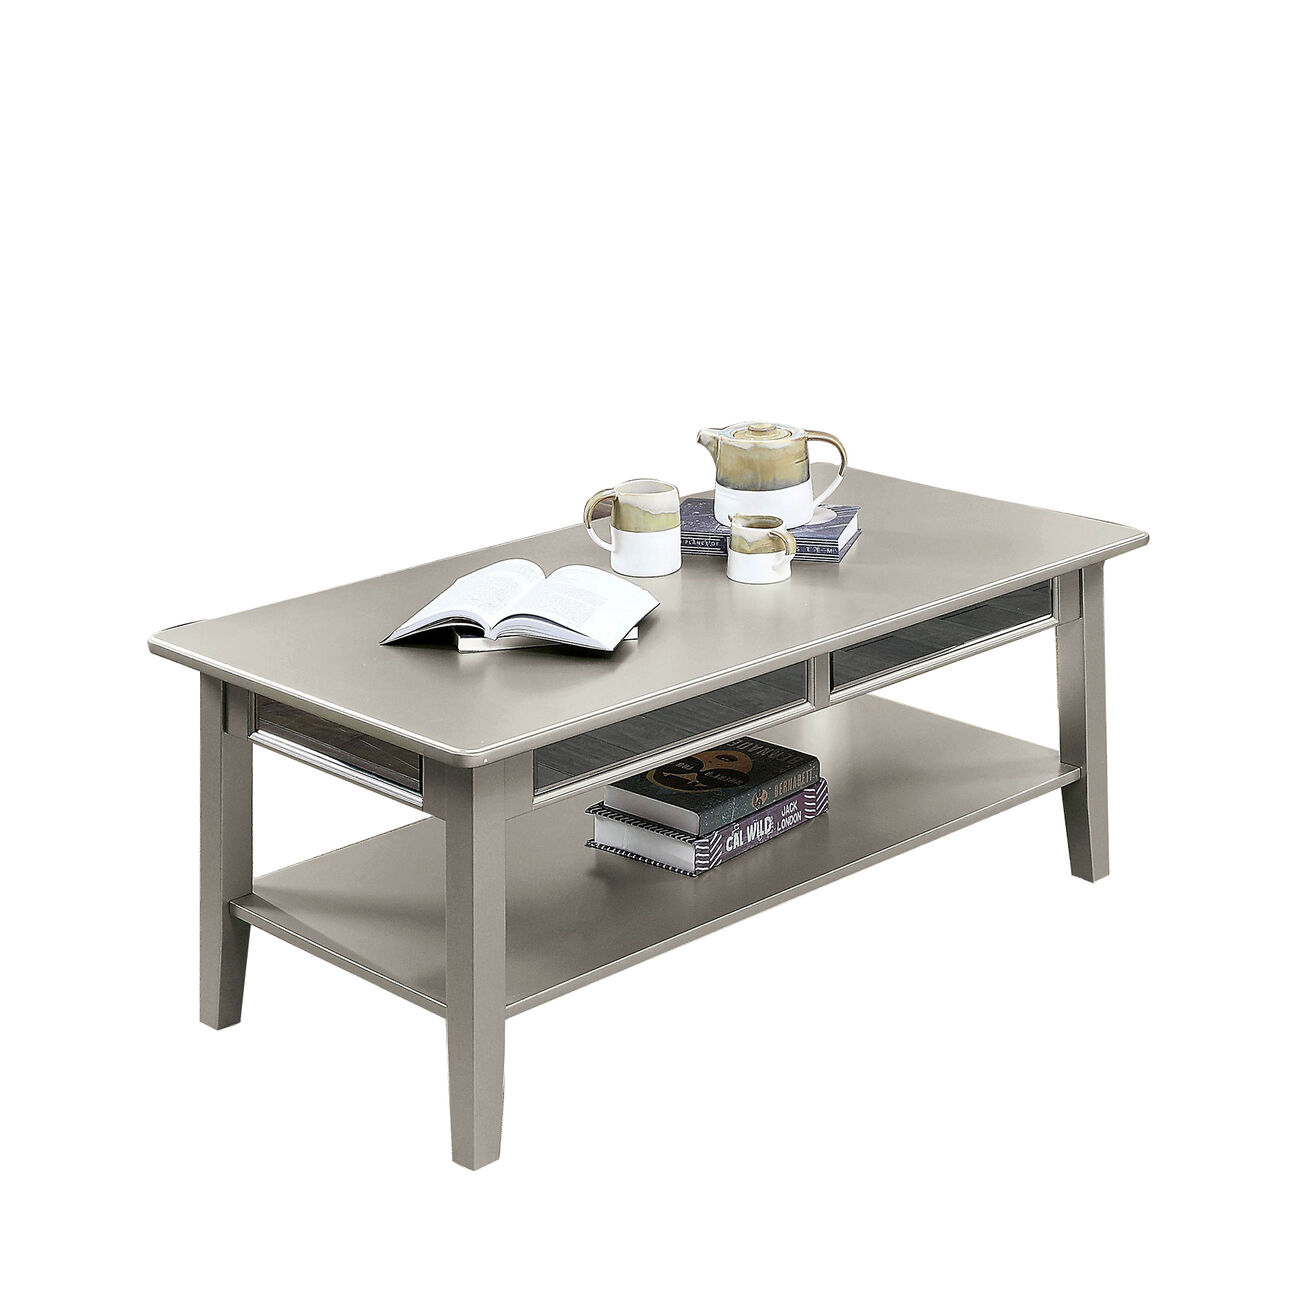 Transitional Coffee Table with Mirror Insert and Open Bottom Shelf, Silver